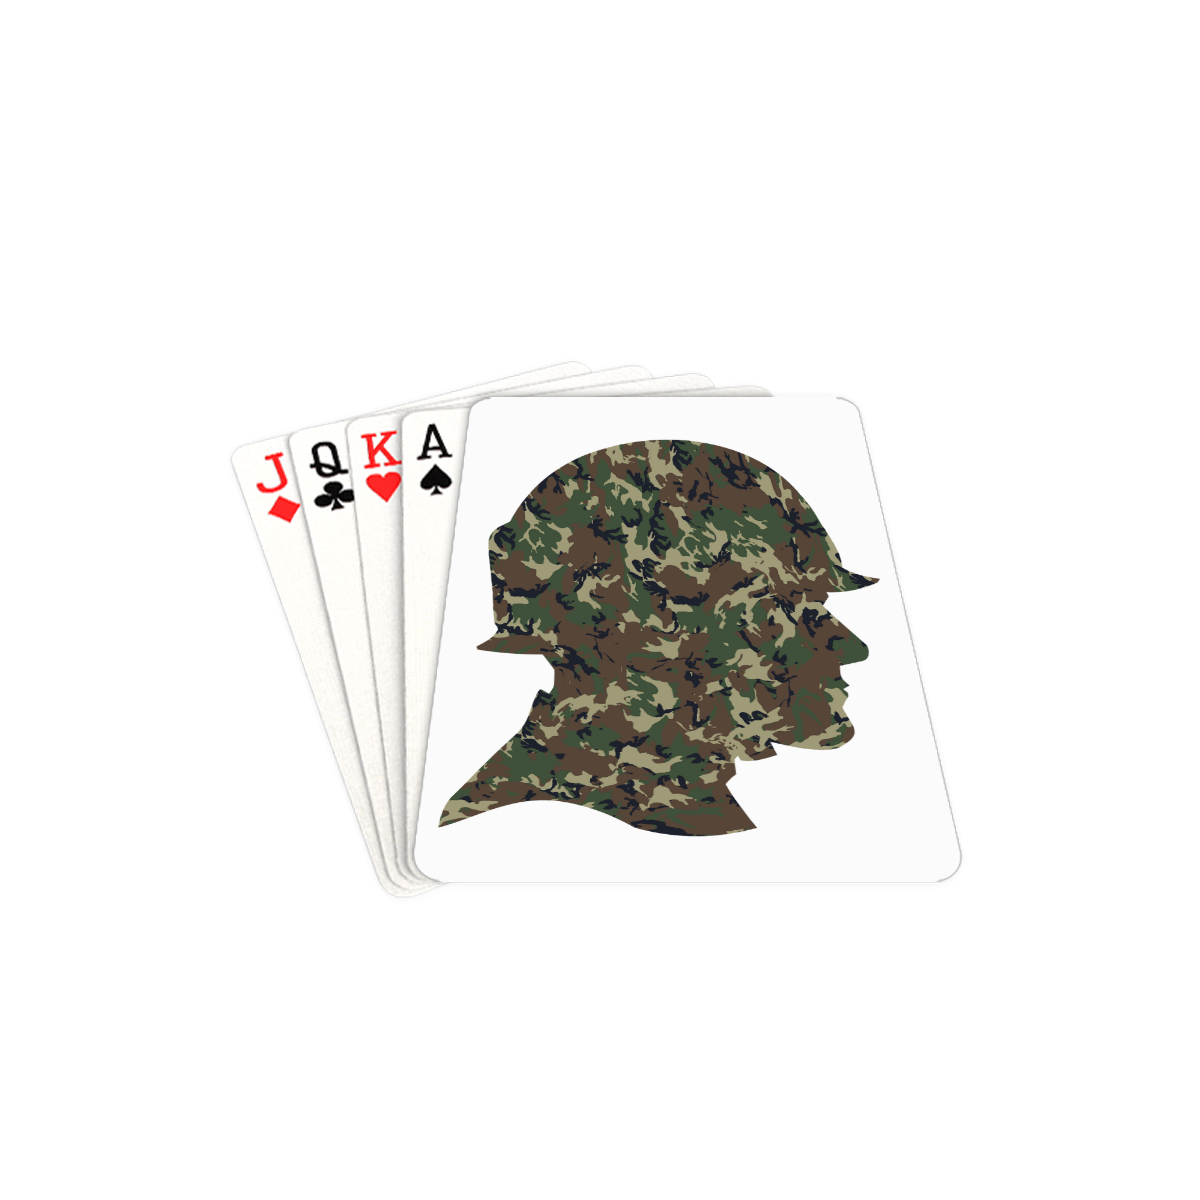 Forest Camouflage Soldier Playing Cards 2.5"x3.5"